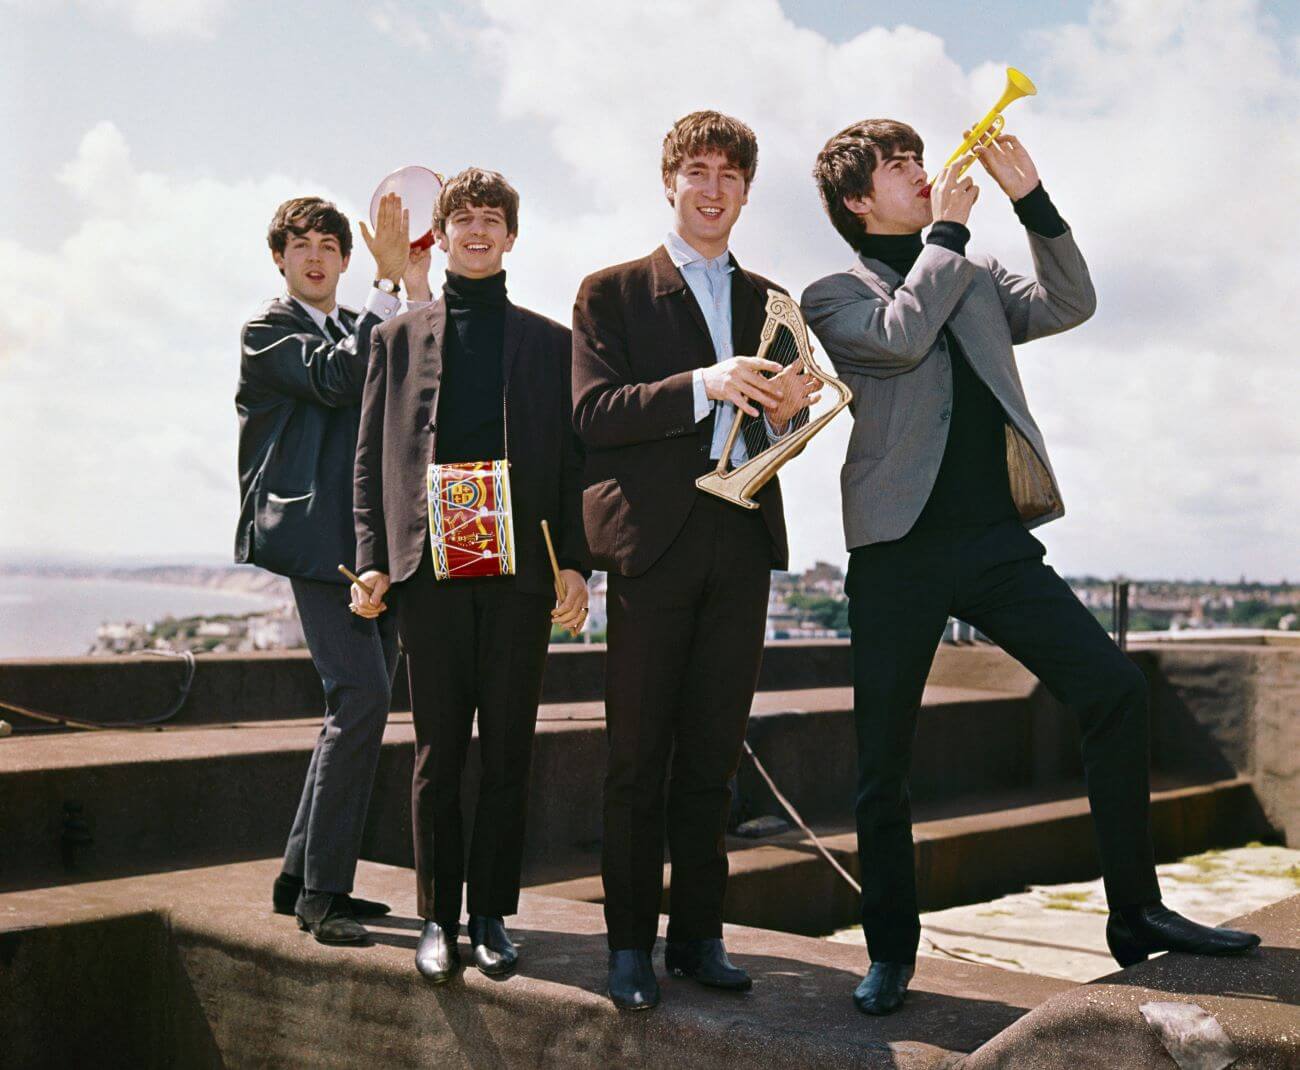 Paul McCartney, Ringo Starr, John Lennon, and George Harrison of The Beatles play small instruments on a rooftop